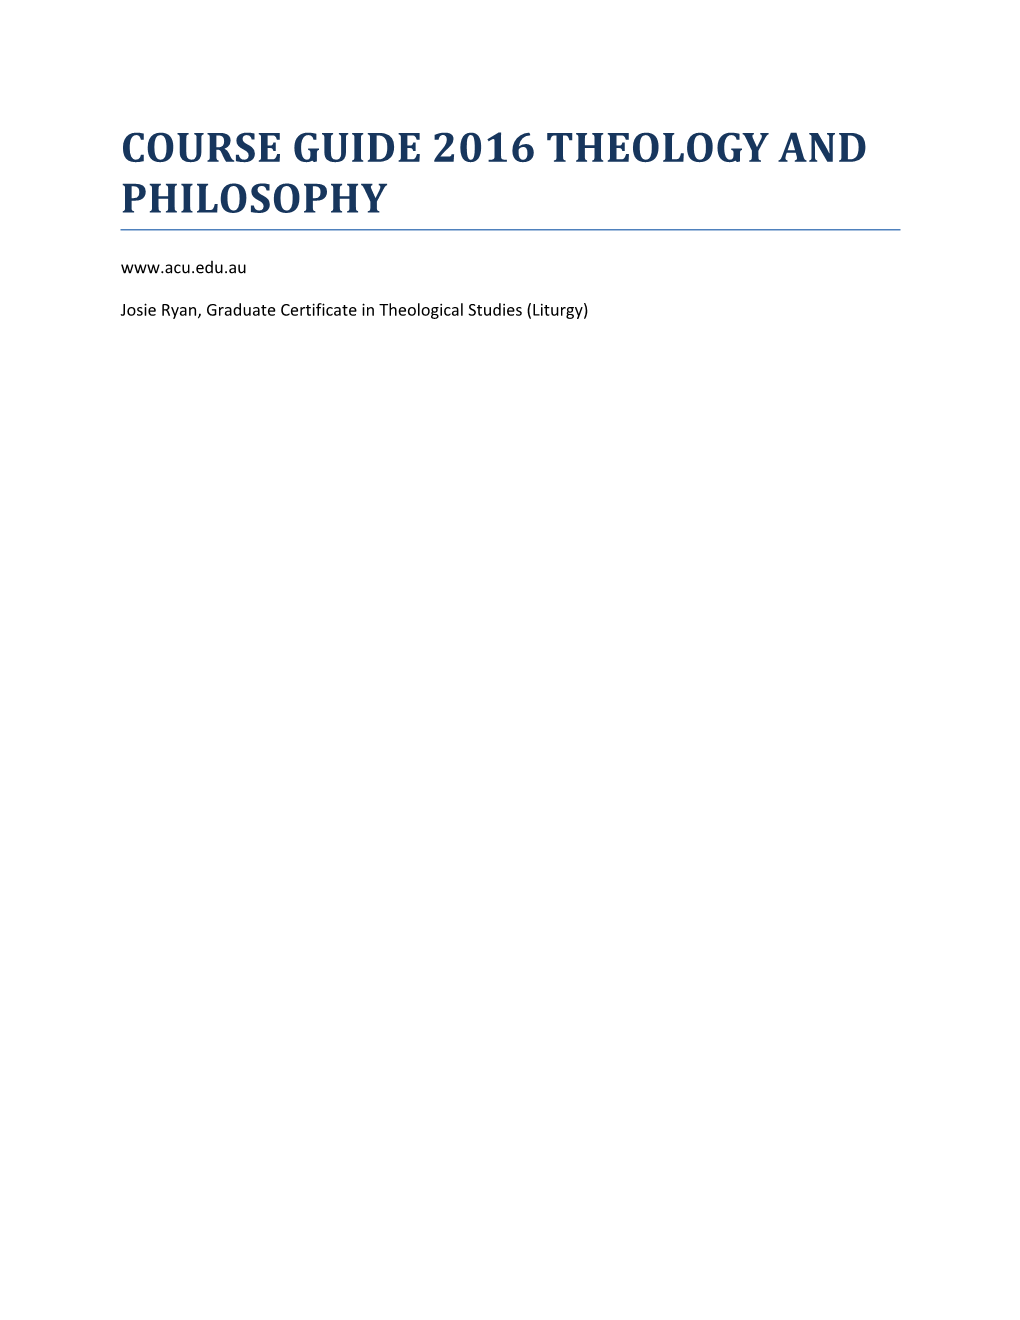 Course Guide 2016 Theology and Philosophy